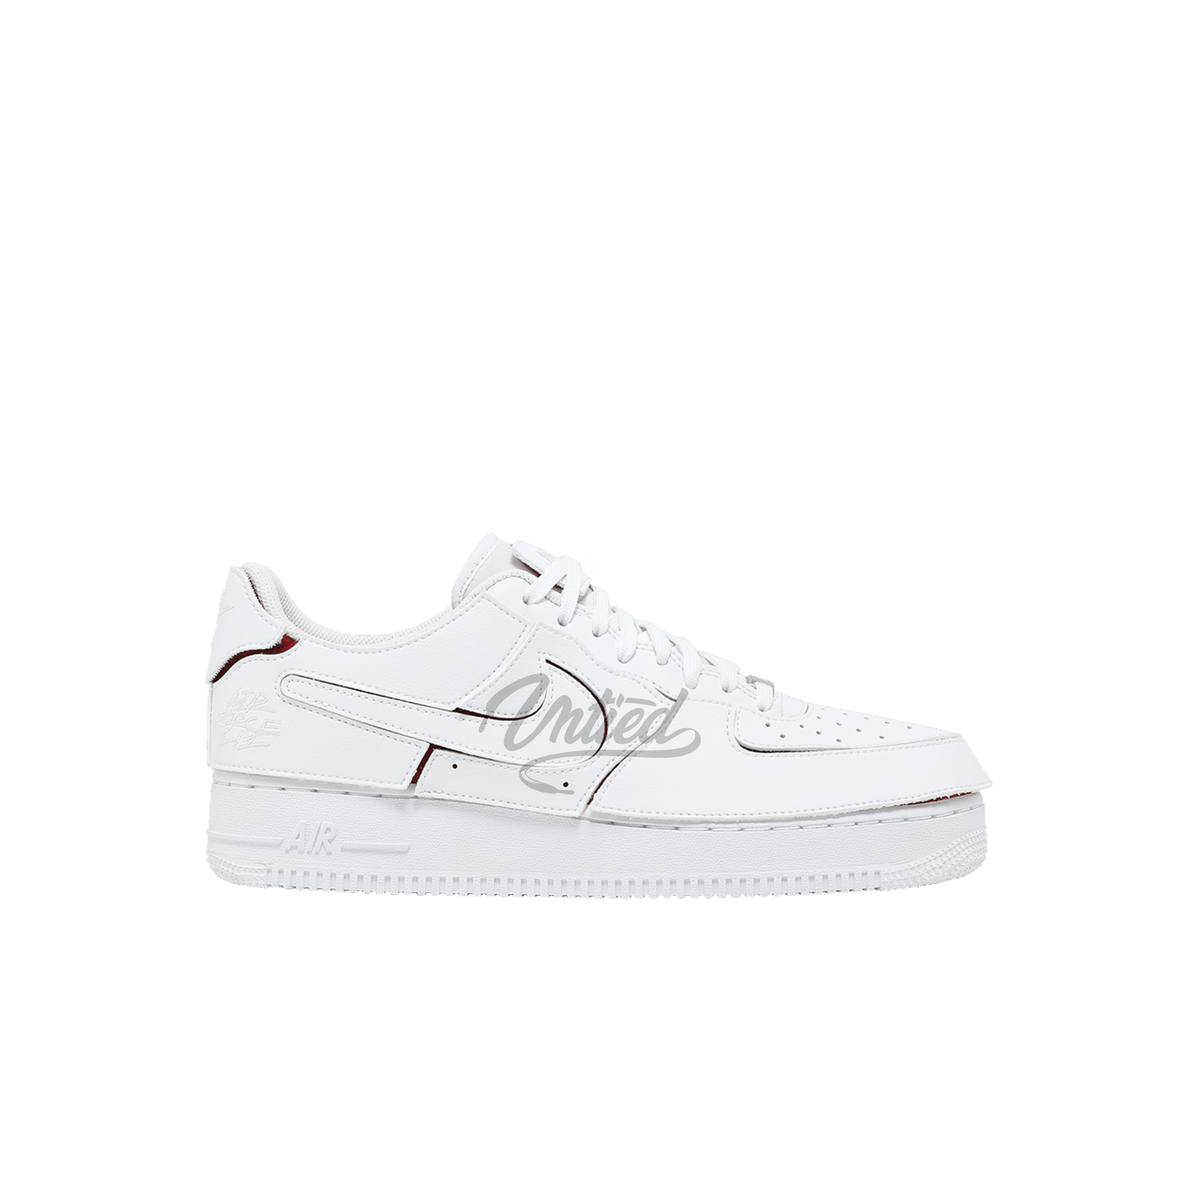 Air Force 1 "White/Varsity Red Tear Away"